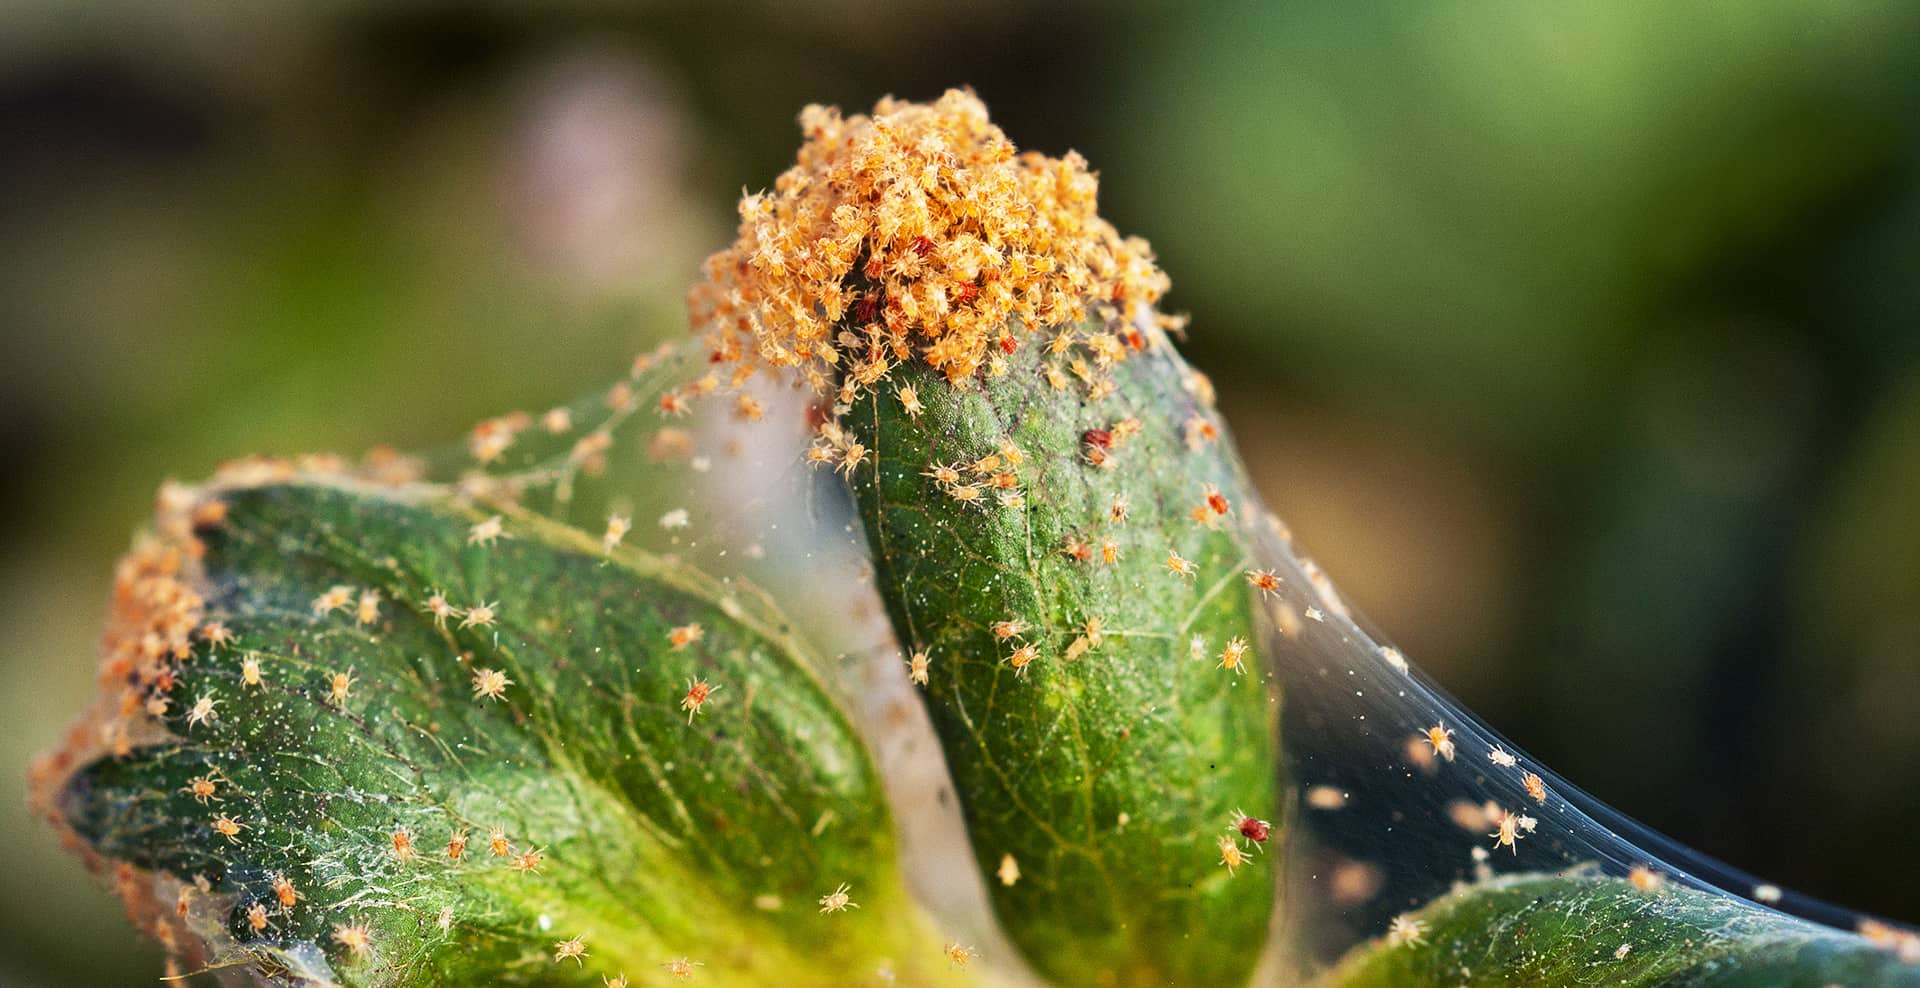 Spider Mites as a pests on a cannabis plants